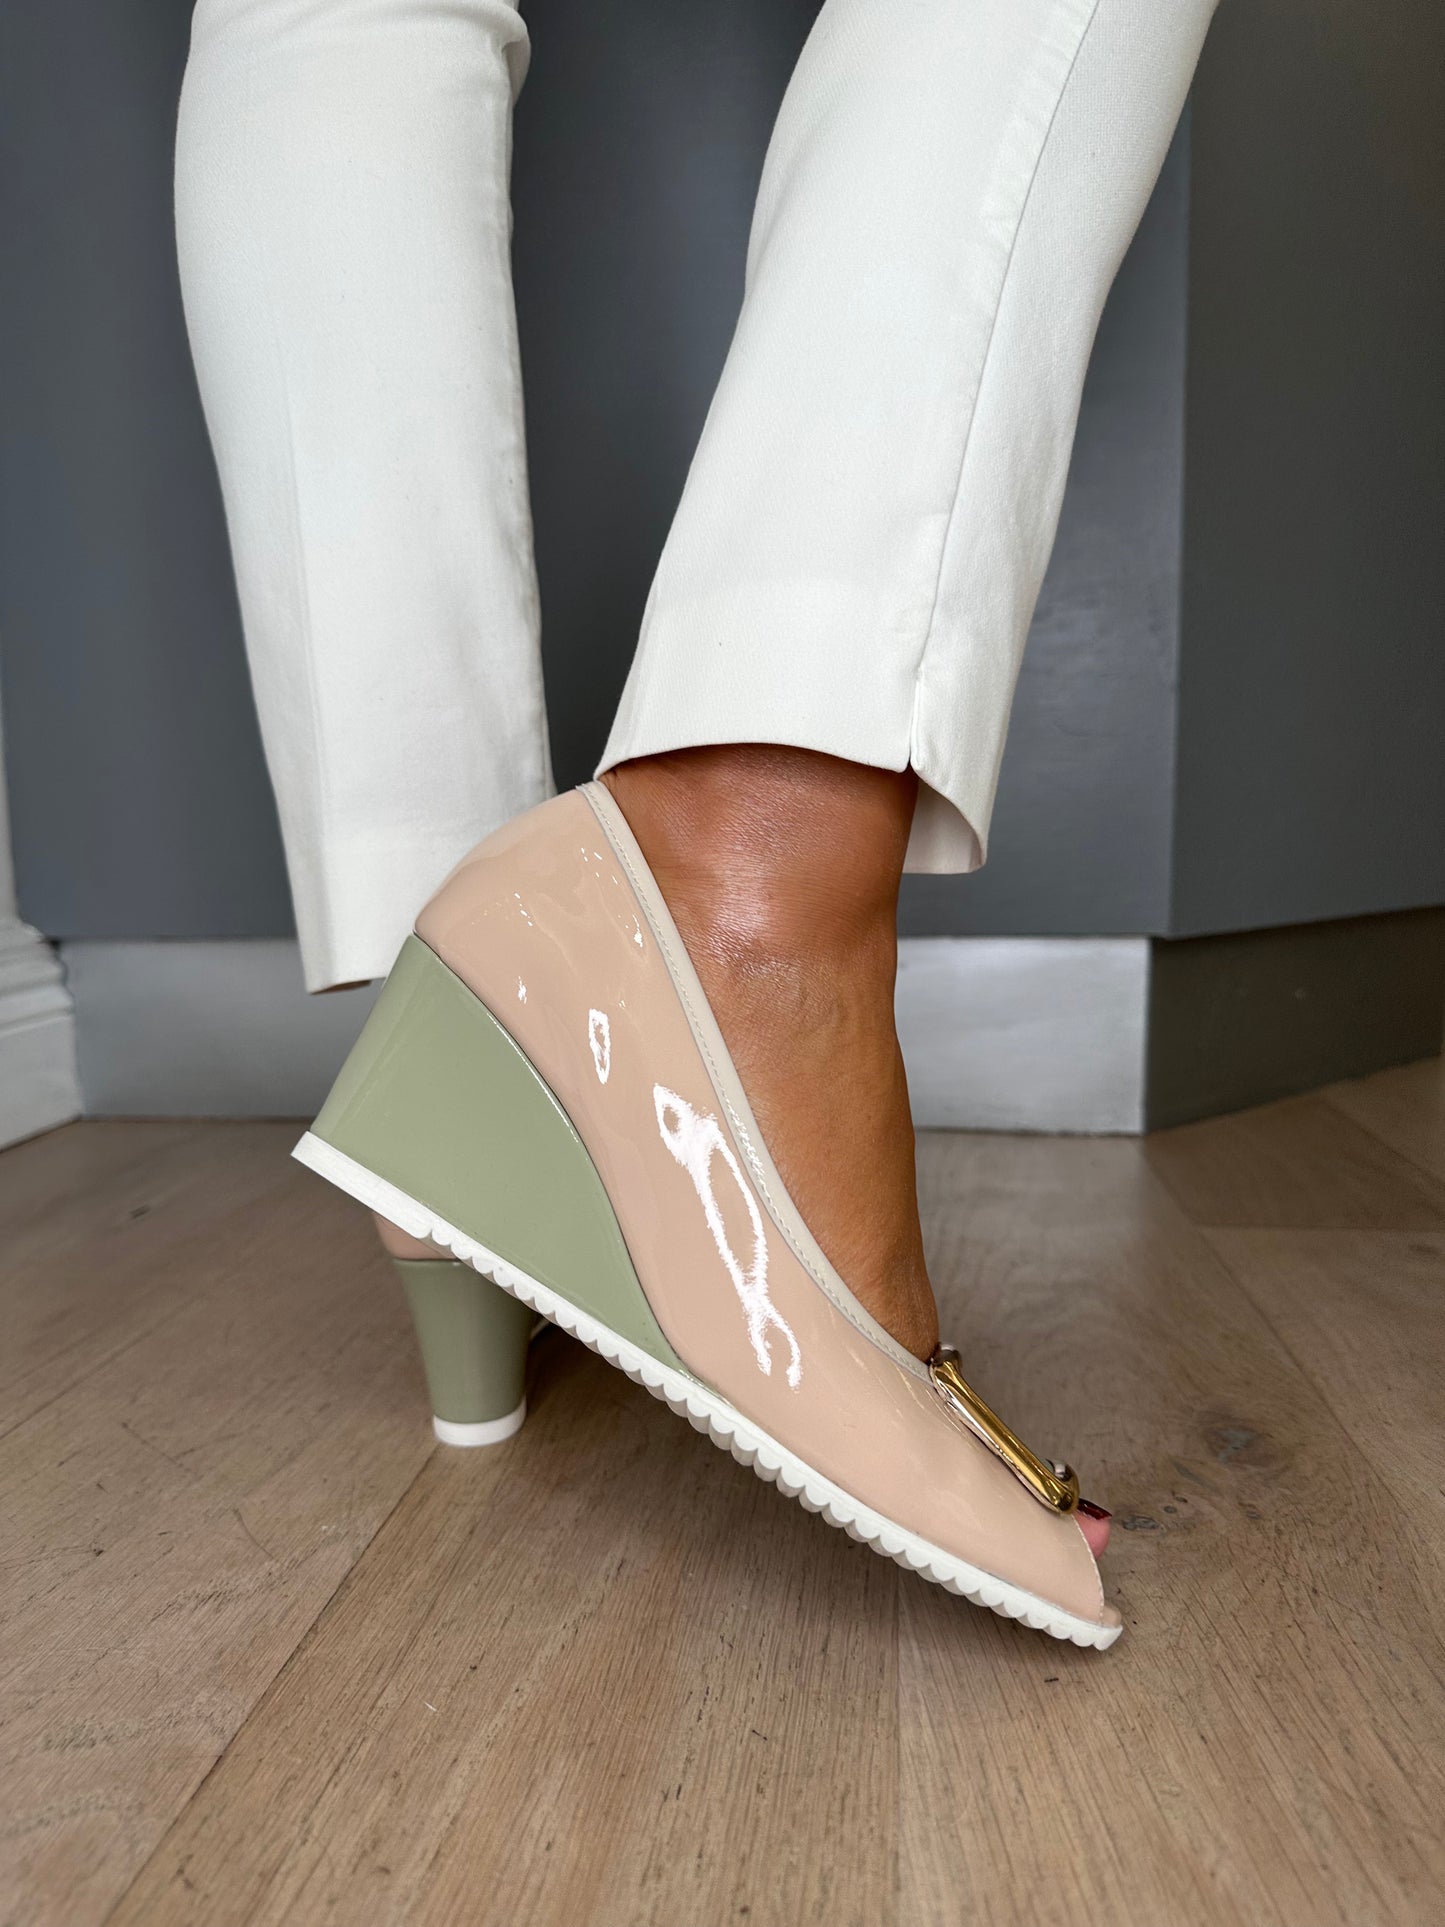 Le Babe – Nude Patent Peep Toe Wedge With Soft Green Patent Trim